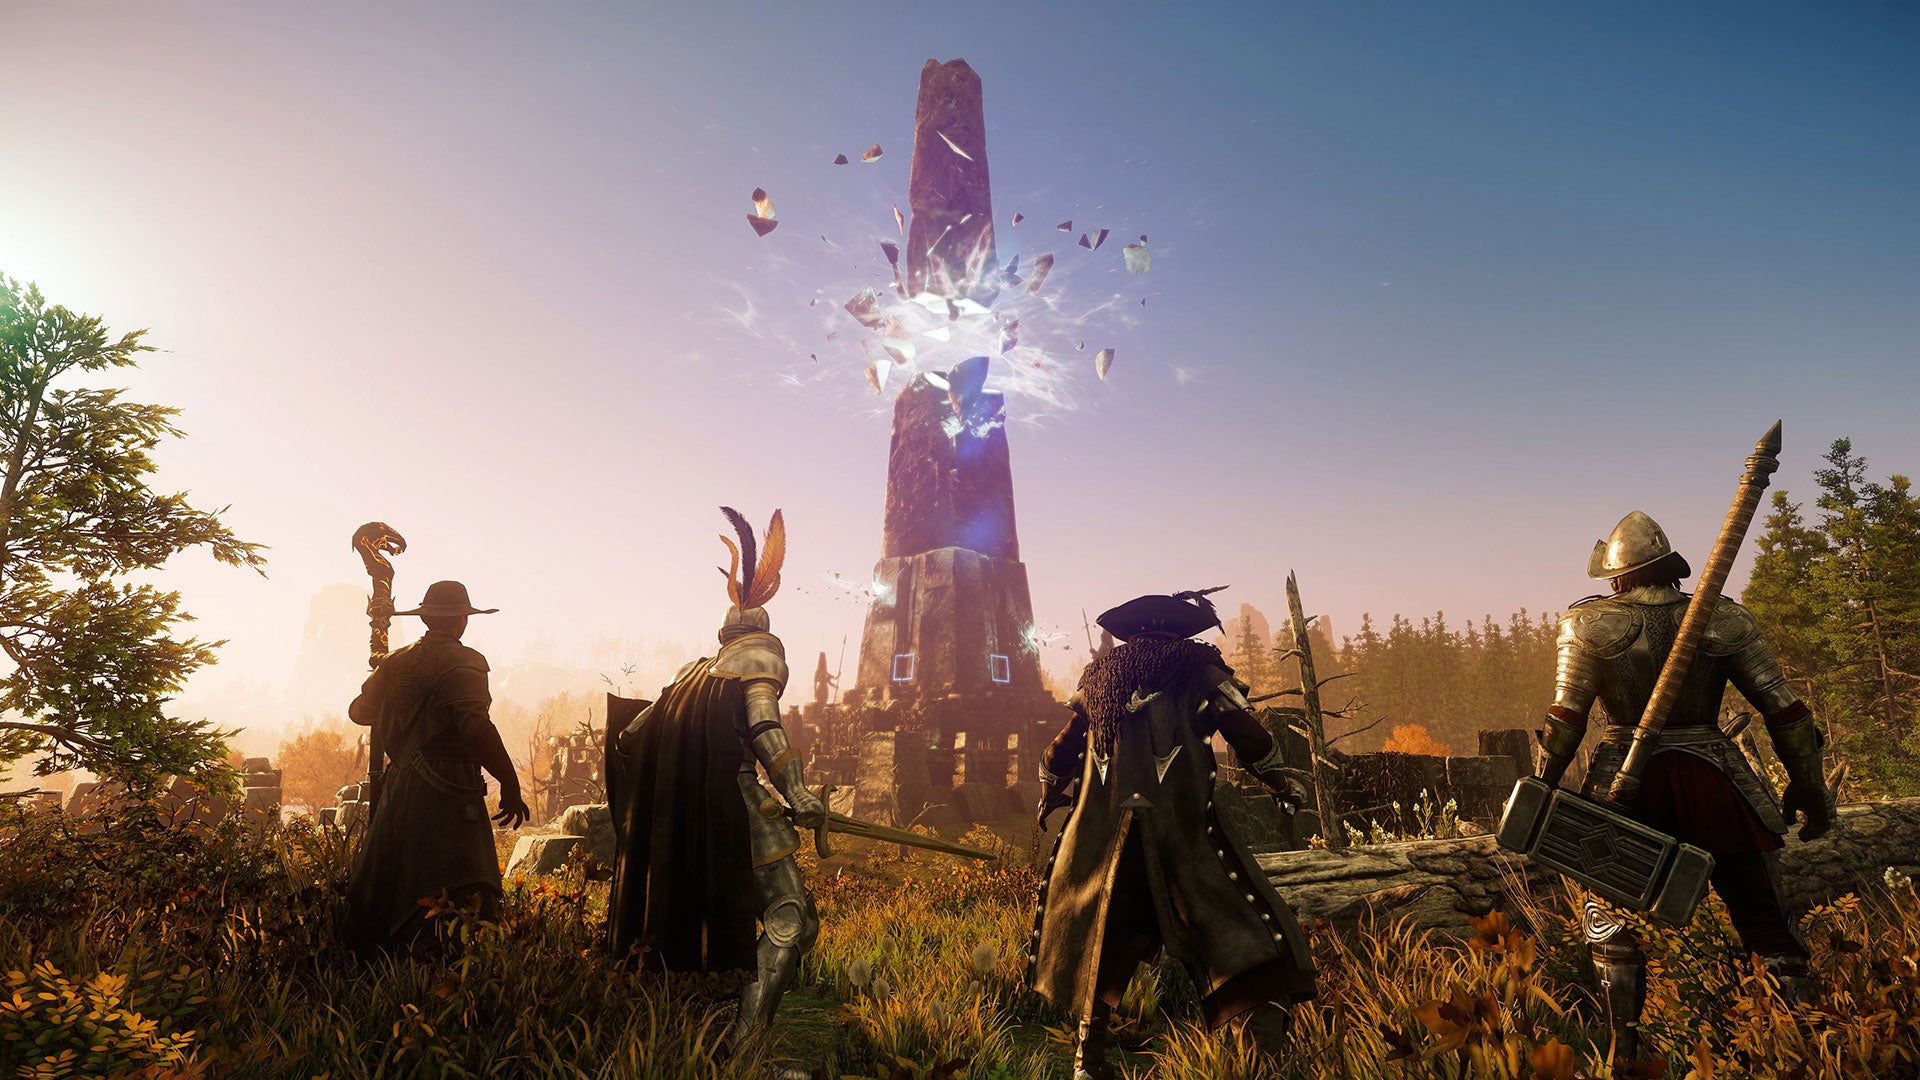 New World: Four adventurers stand with their back to the camera, looking at a shattered obelisk in the distance. The obelisk appears to have been frozen in the moment of its explosion.